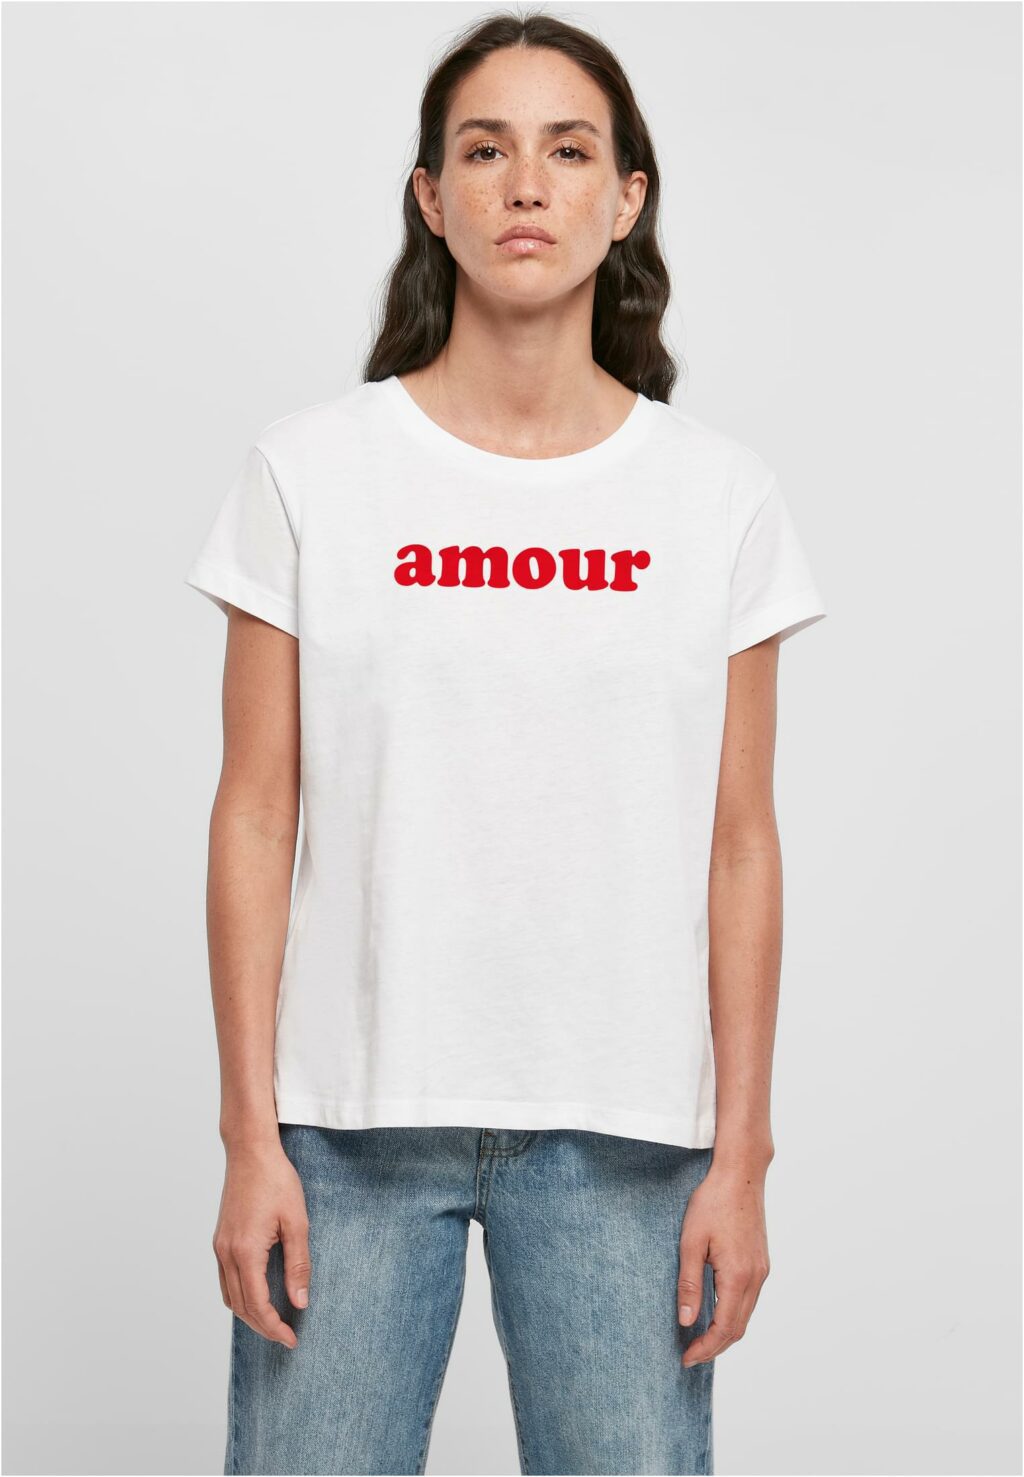 Amour Tee white BE011